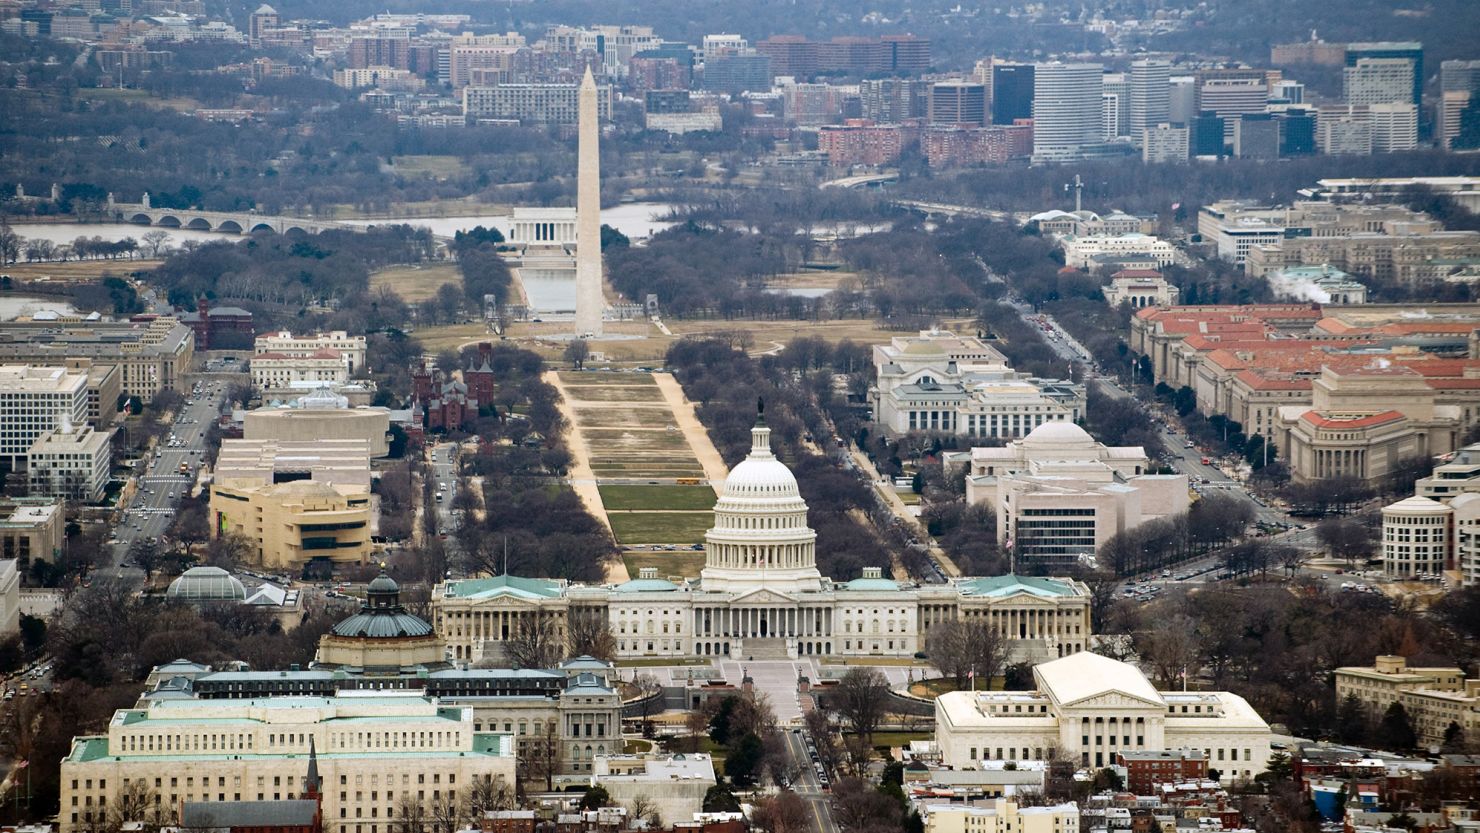 The skyline of Washington, DC, including the US Capitol building, Washington Monument, Lincoln Memorial and National Mall, is seen from the air, January 29, 2010.  AFP PHOTO / Saul LOEB (Photo credit should read SAUL LOEB/AFP via Getty Images)